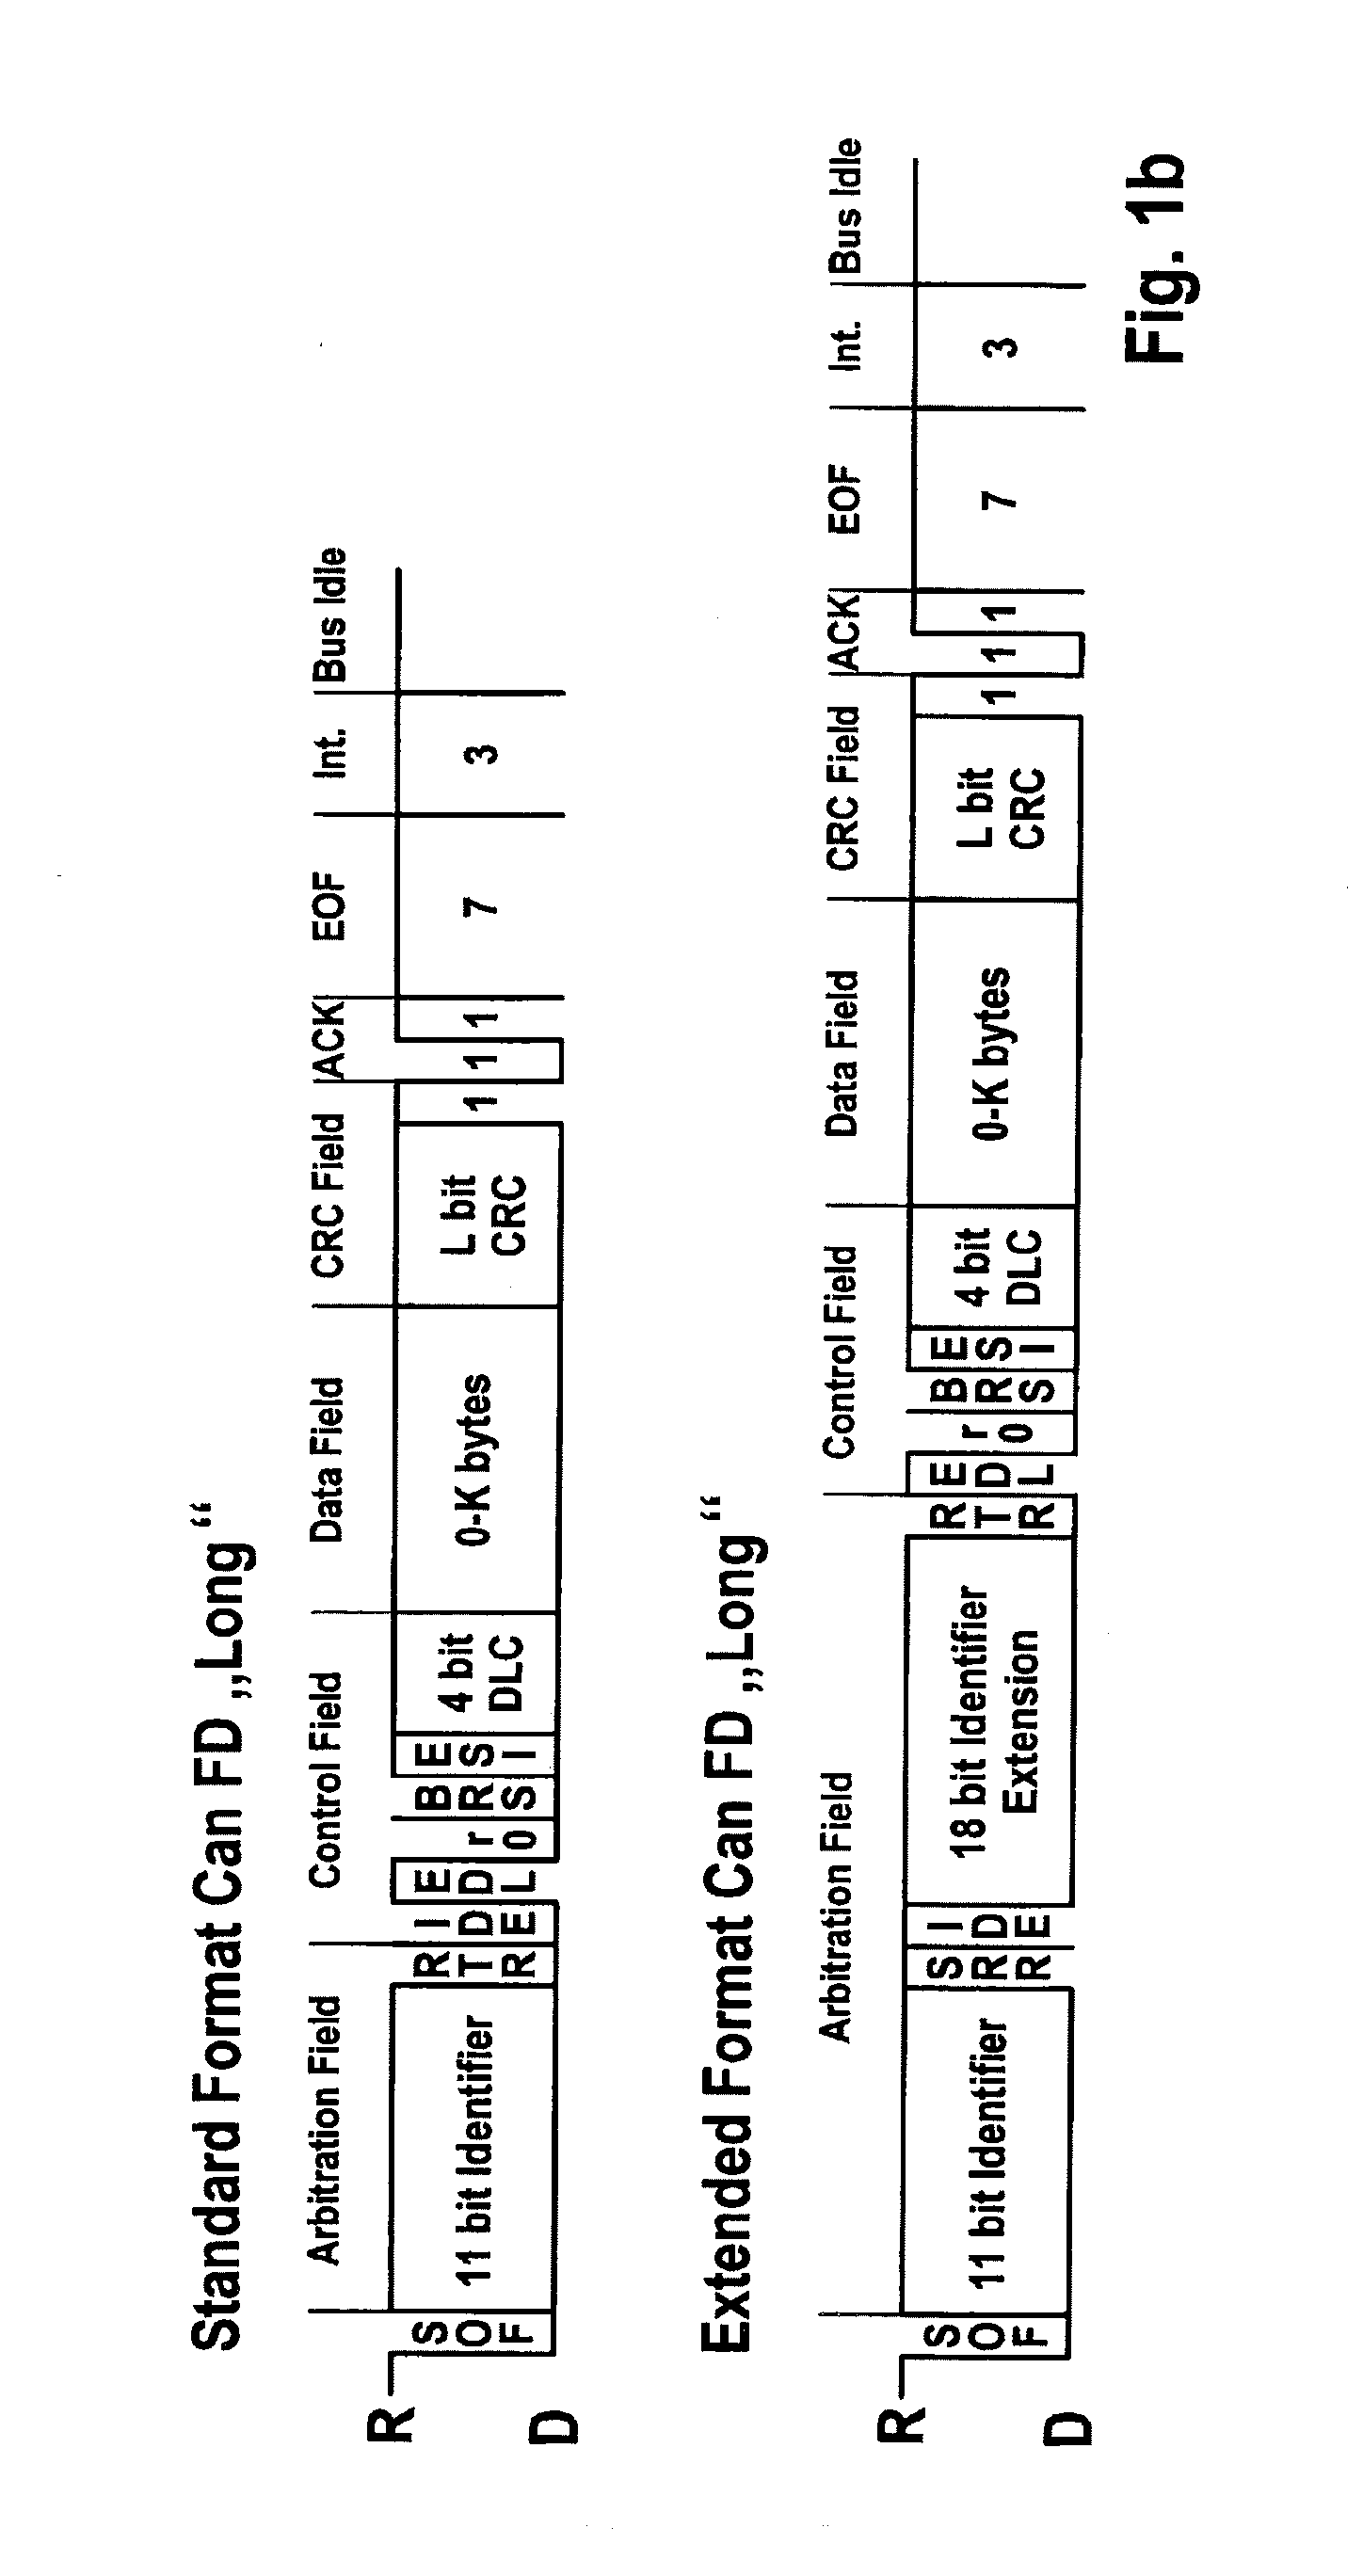 Method and device for checking the correct functioning of a serial data transmission